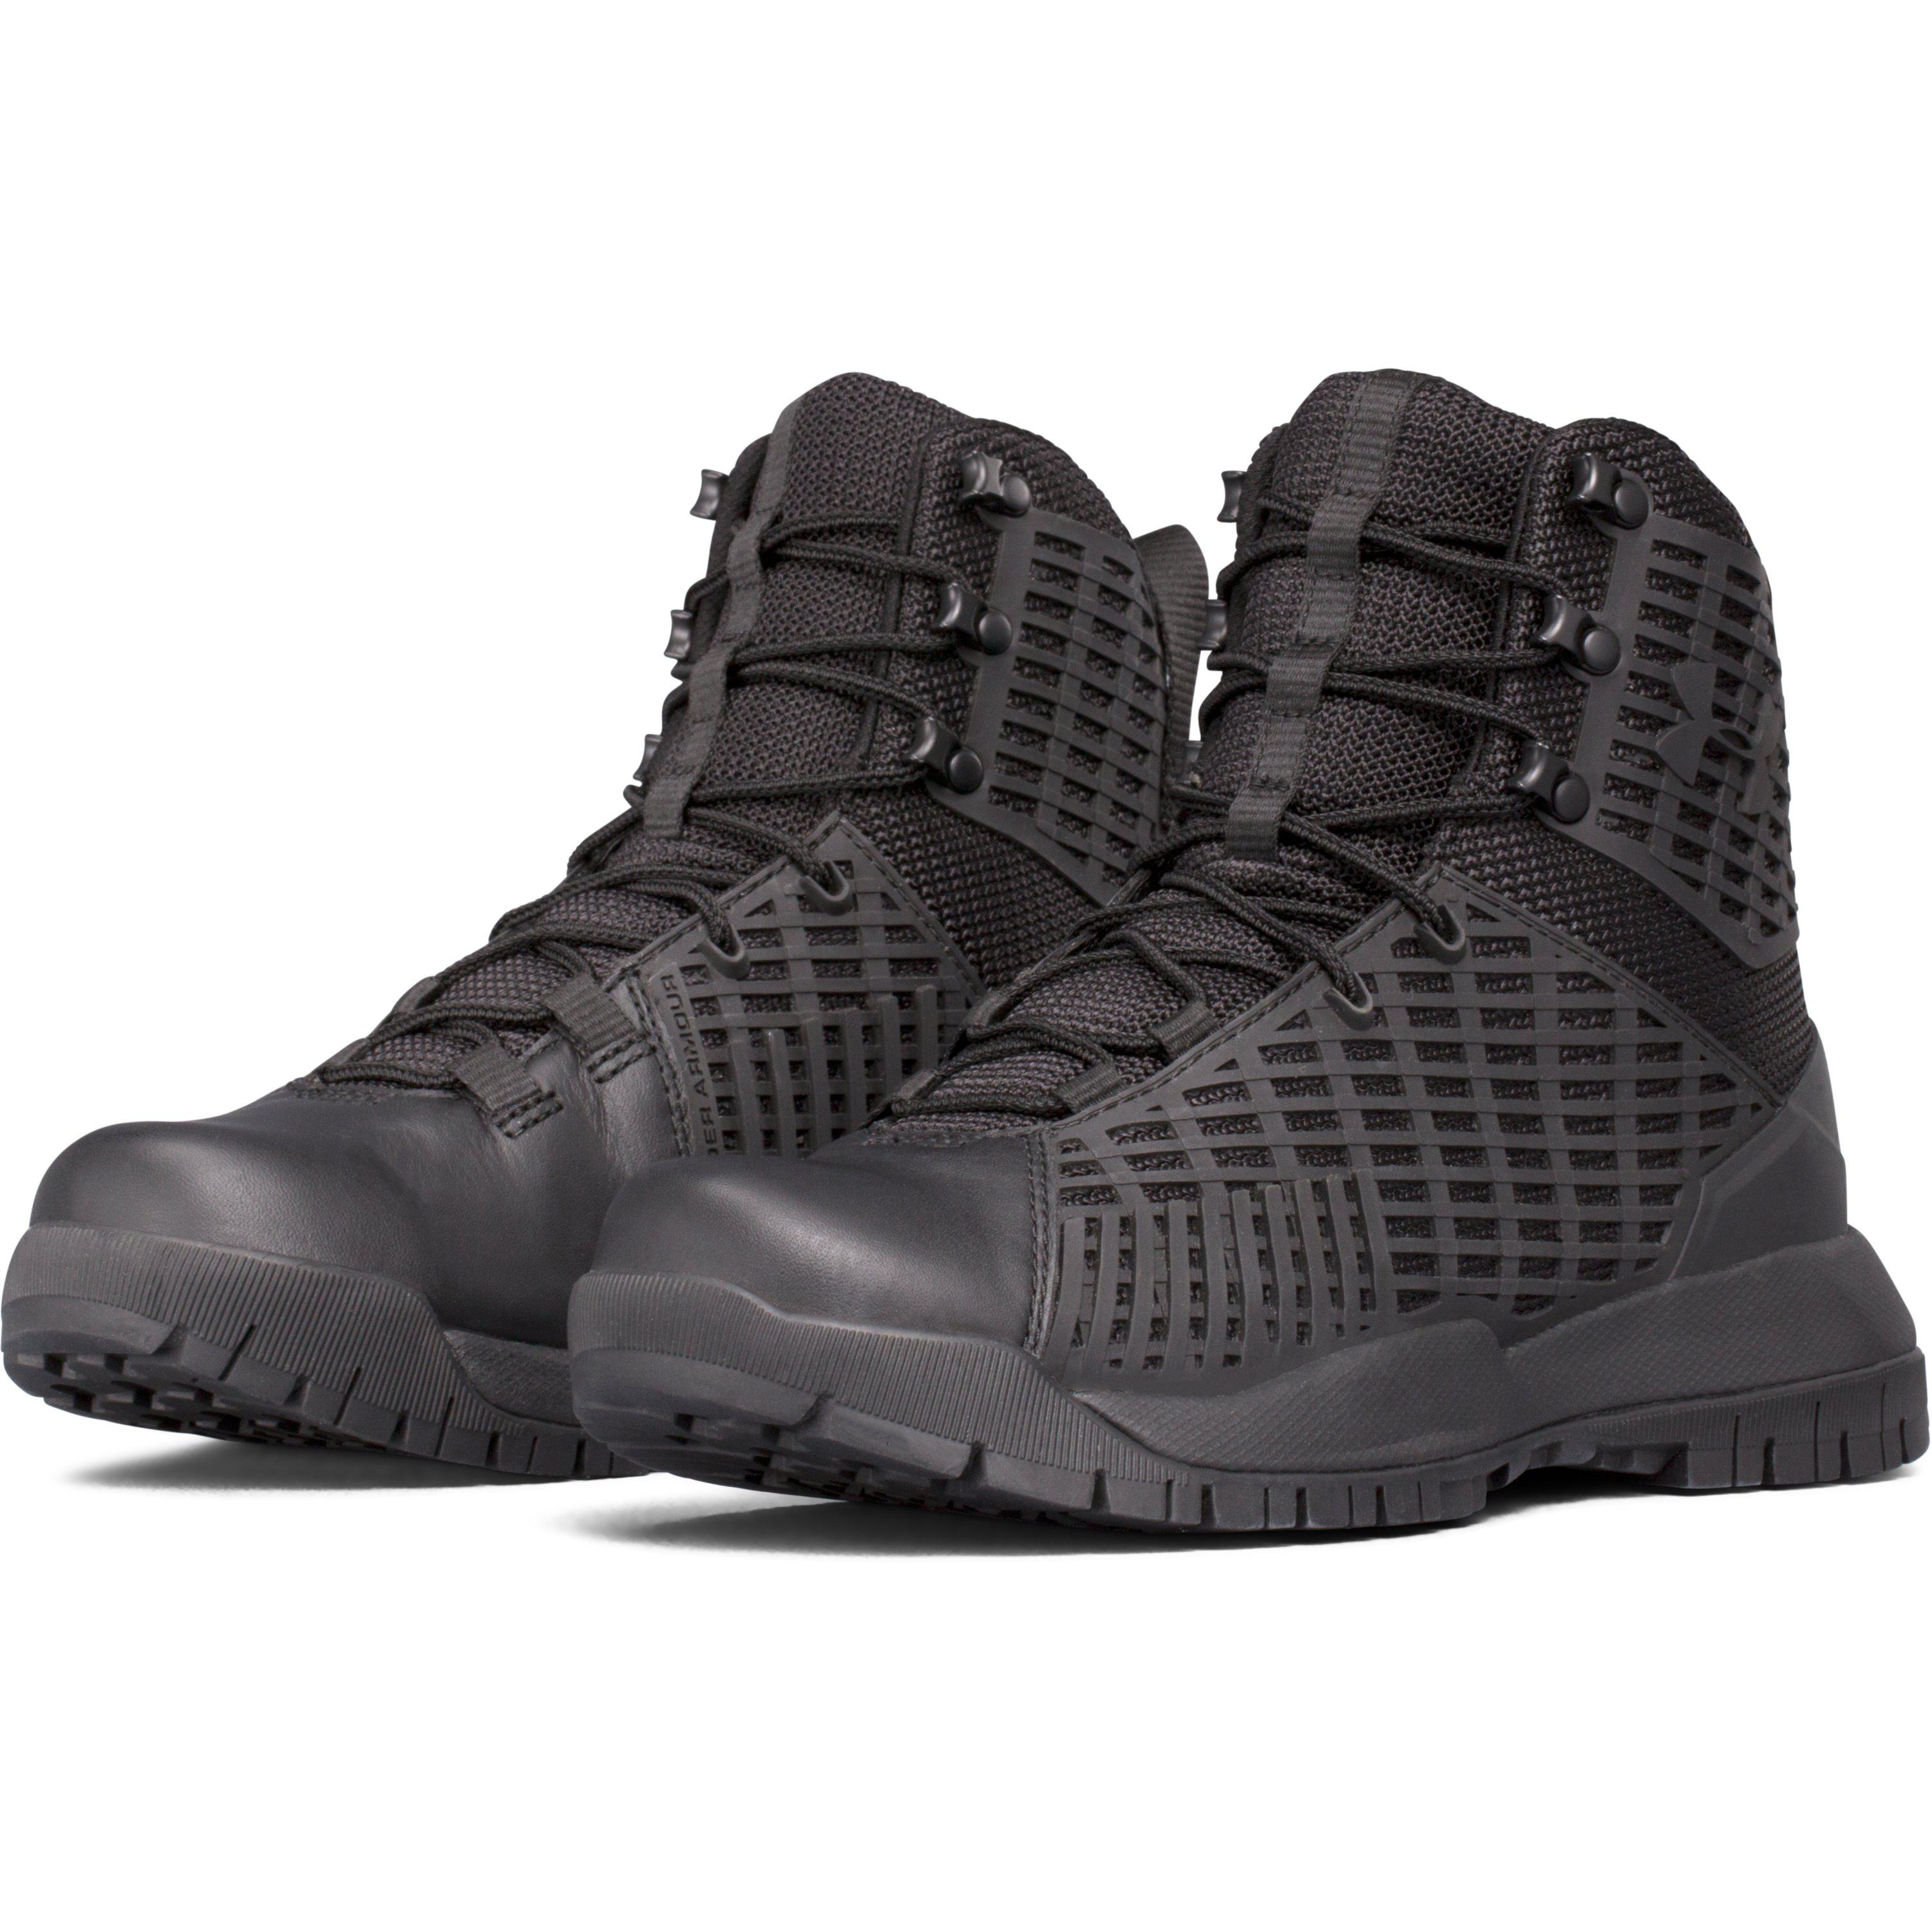 Under Armour Women's Ua Stryker Tactical Boots in Black | Lyst